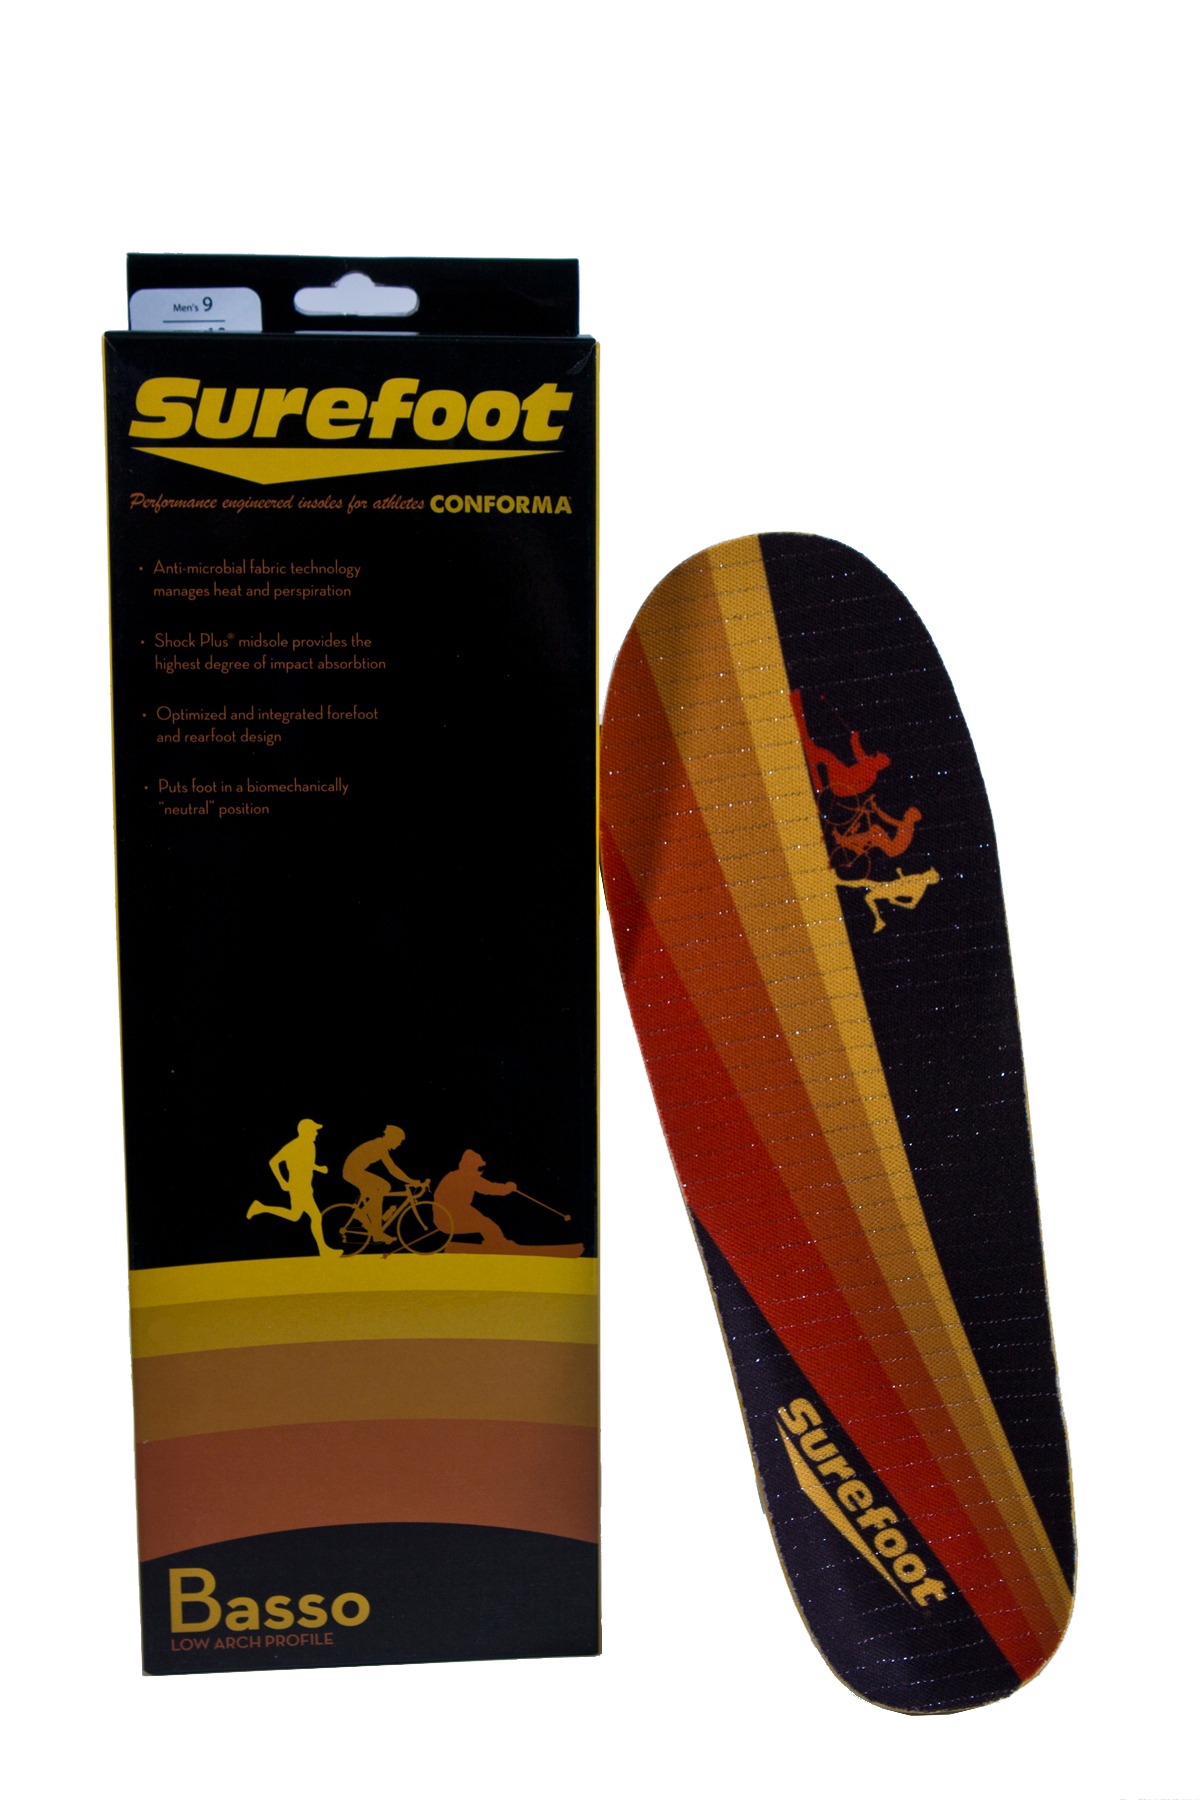 Image of the Conforma Basso low arch Insole by Surefoot and it's box in Orange/Black